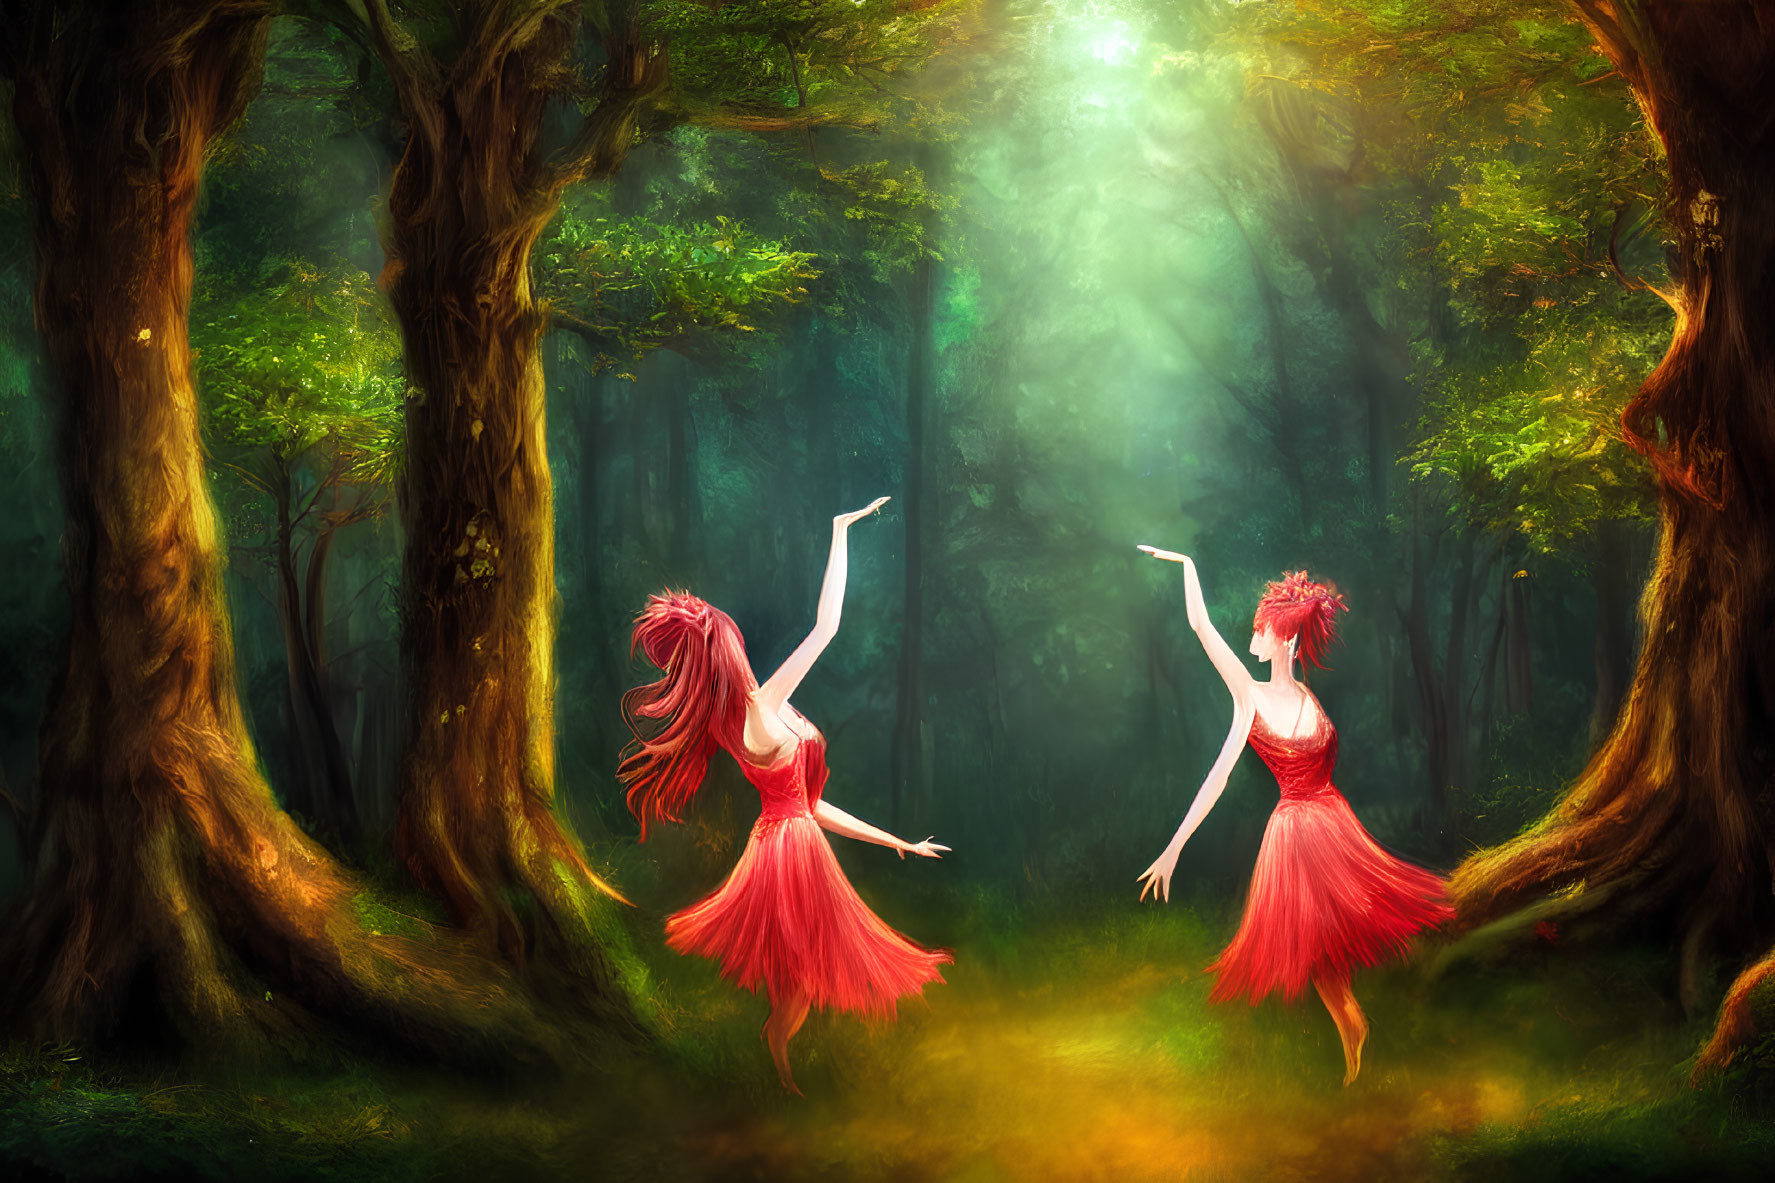 Ethereal figures in red dresses dancing in enchanted forest landscape